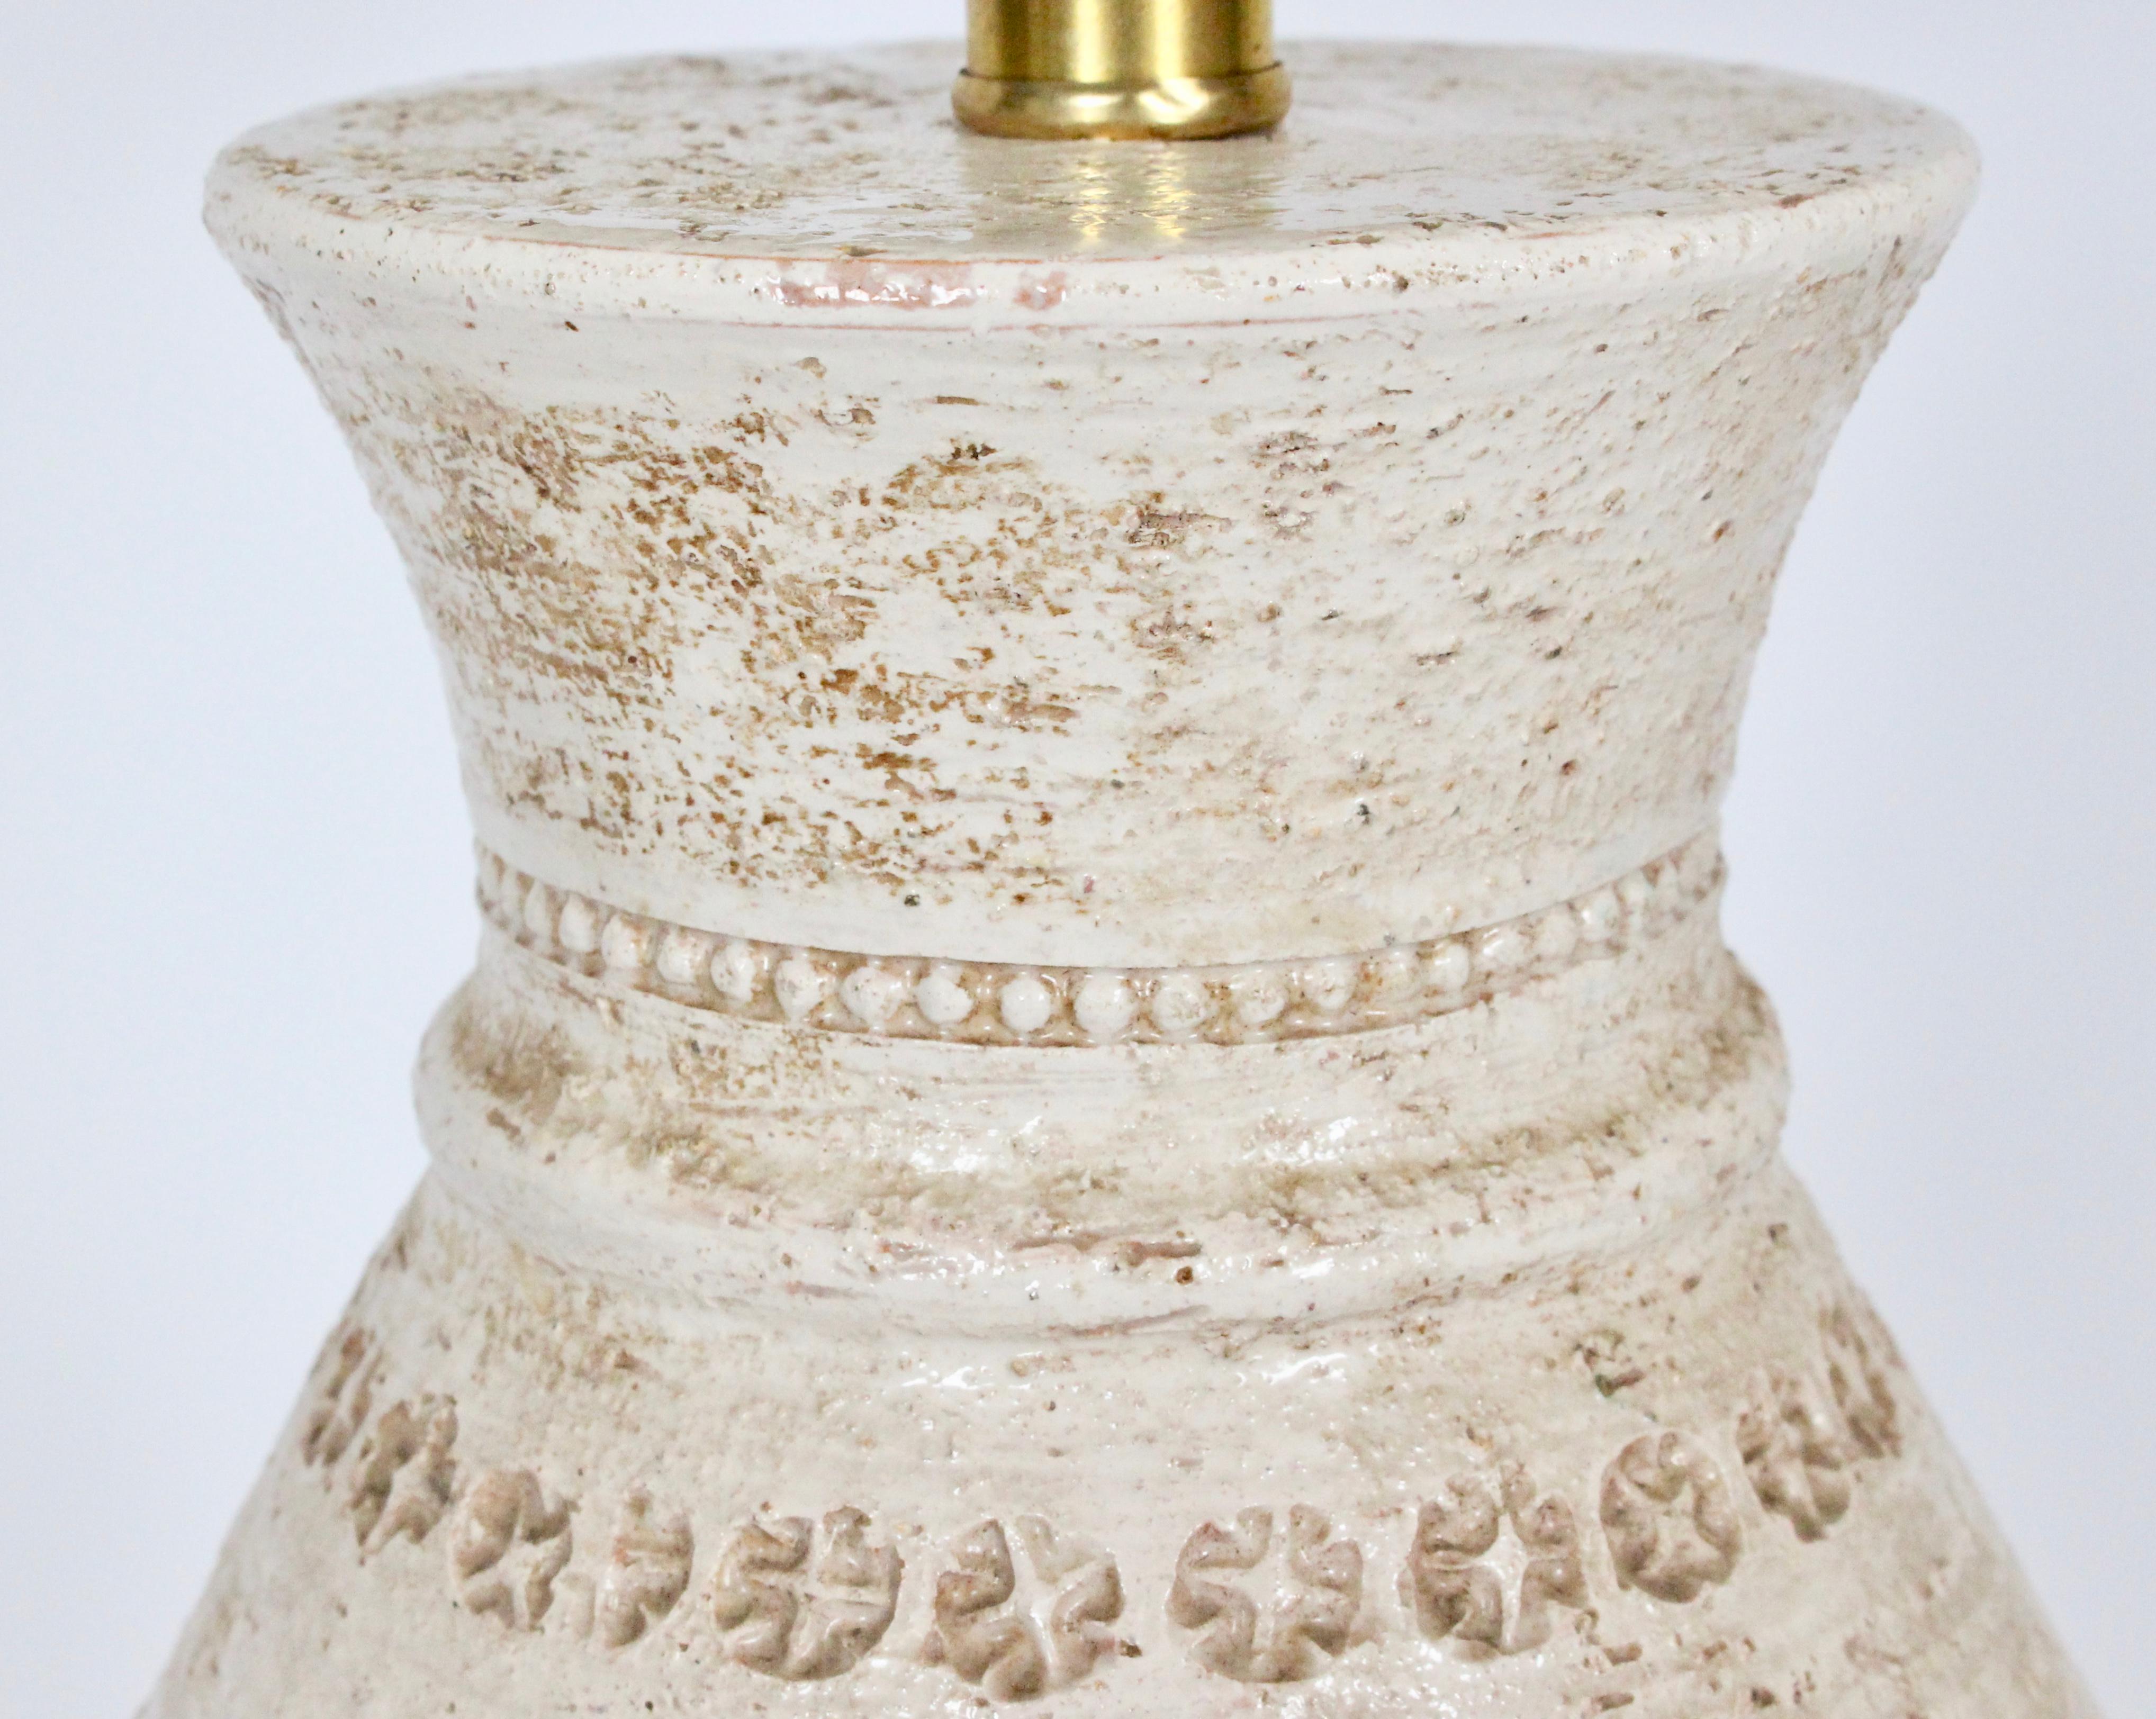 Aldo Londi for Bitossi Imprinted Cream and Off White Glazed Pottery Table Lamp In Good Condition For Sale In Bainbridge, NY